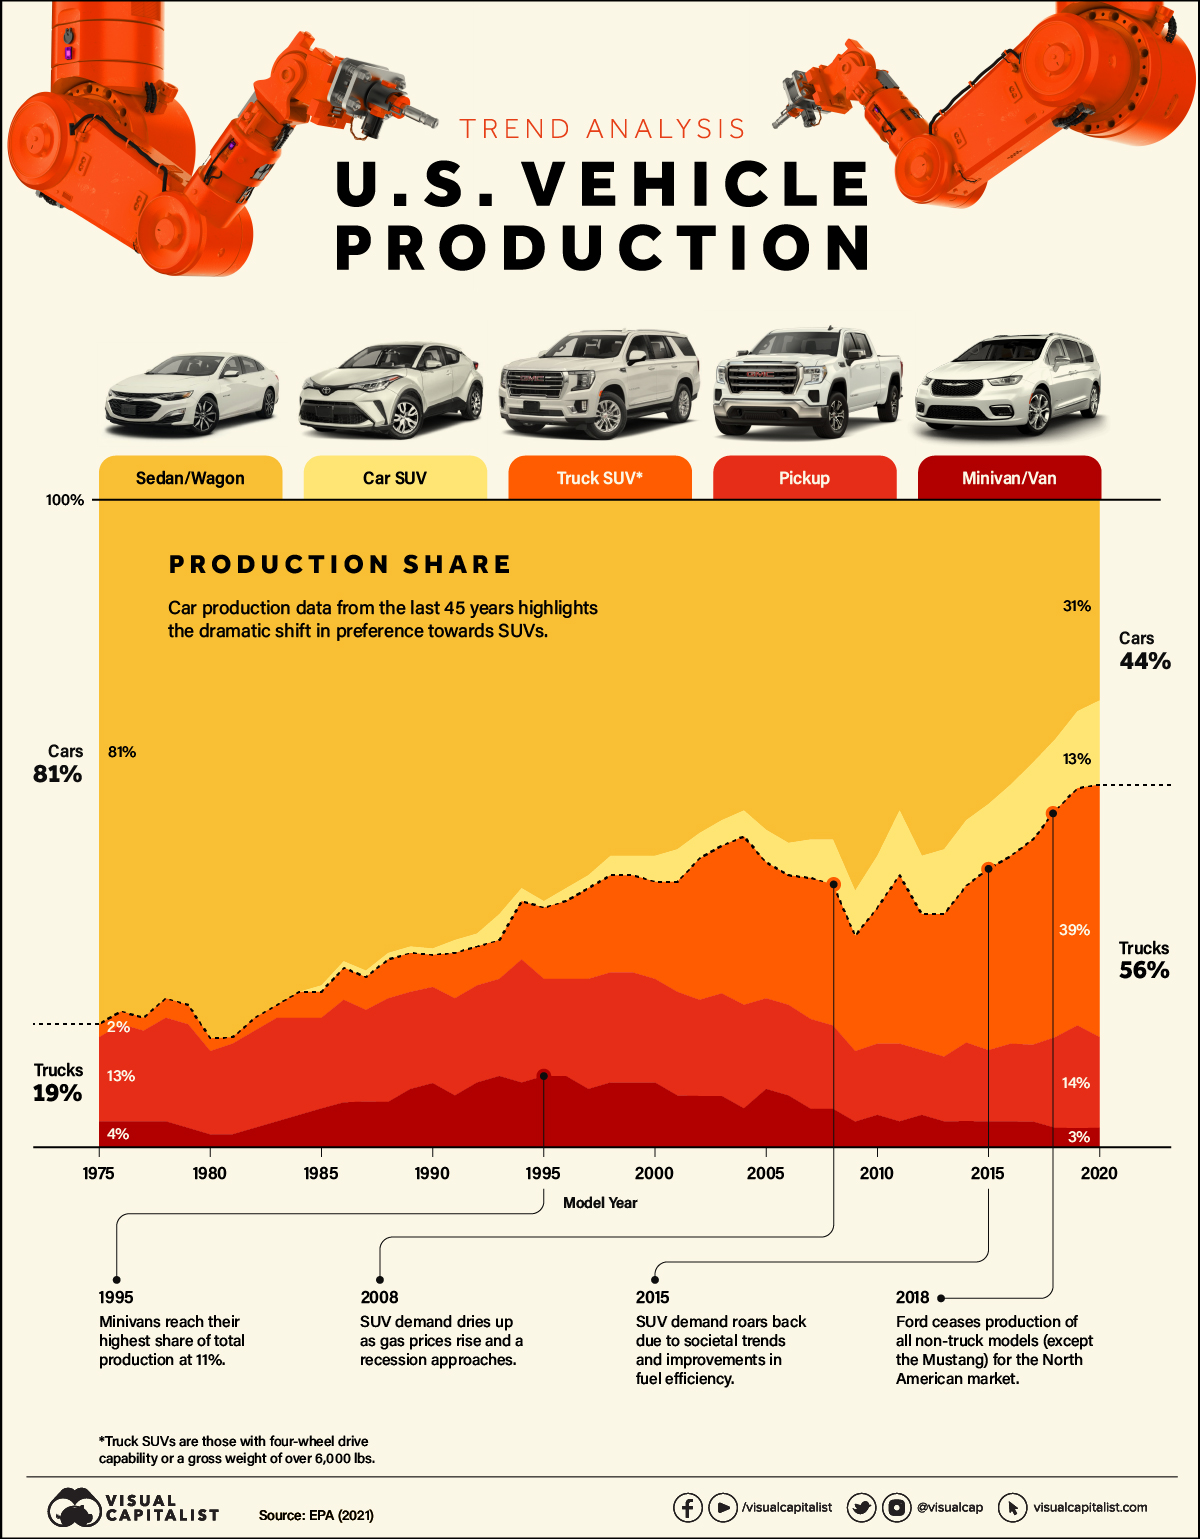 vehicle production trends in the U.S. market